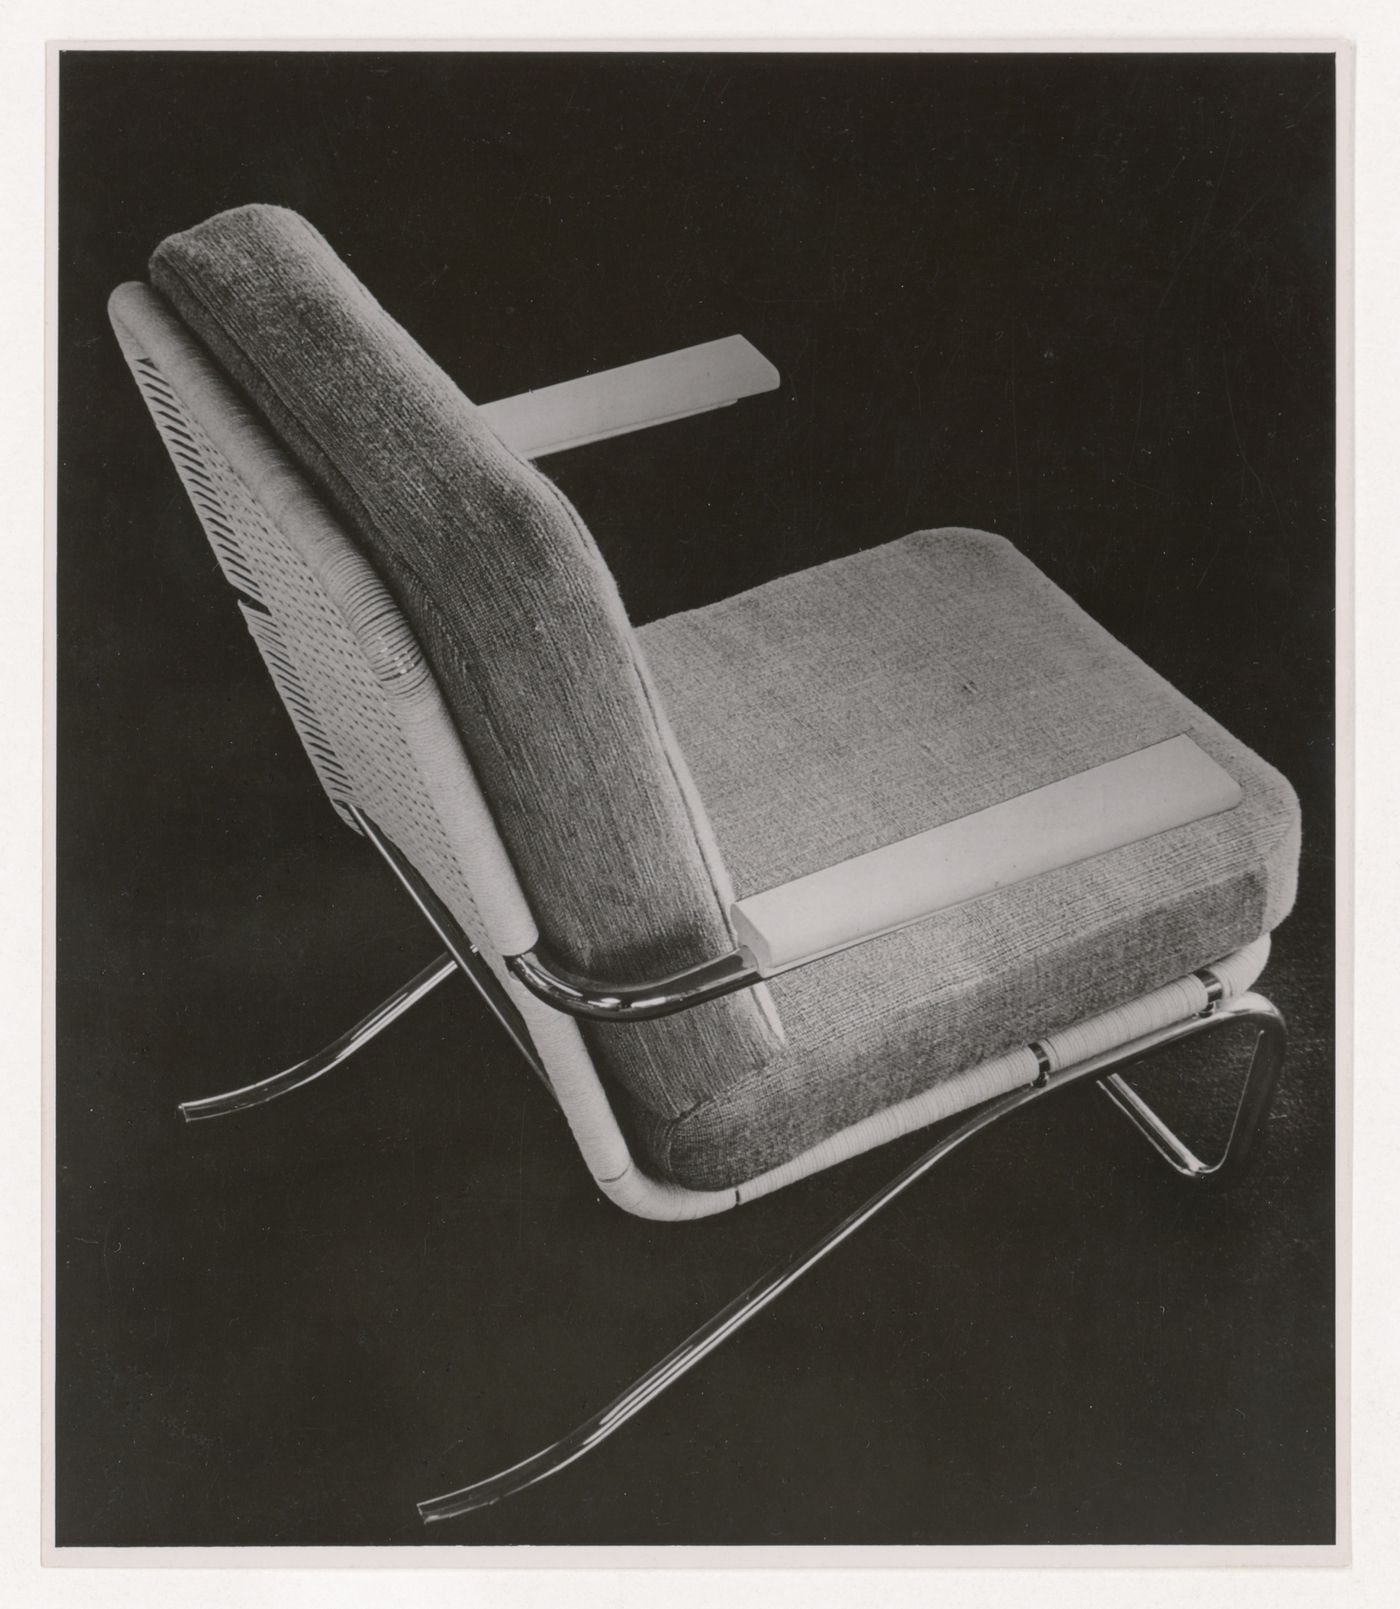 View of an elbow chair with designed by J.J.P. Oud for Metz & Co., Amsterdam, Netherlands